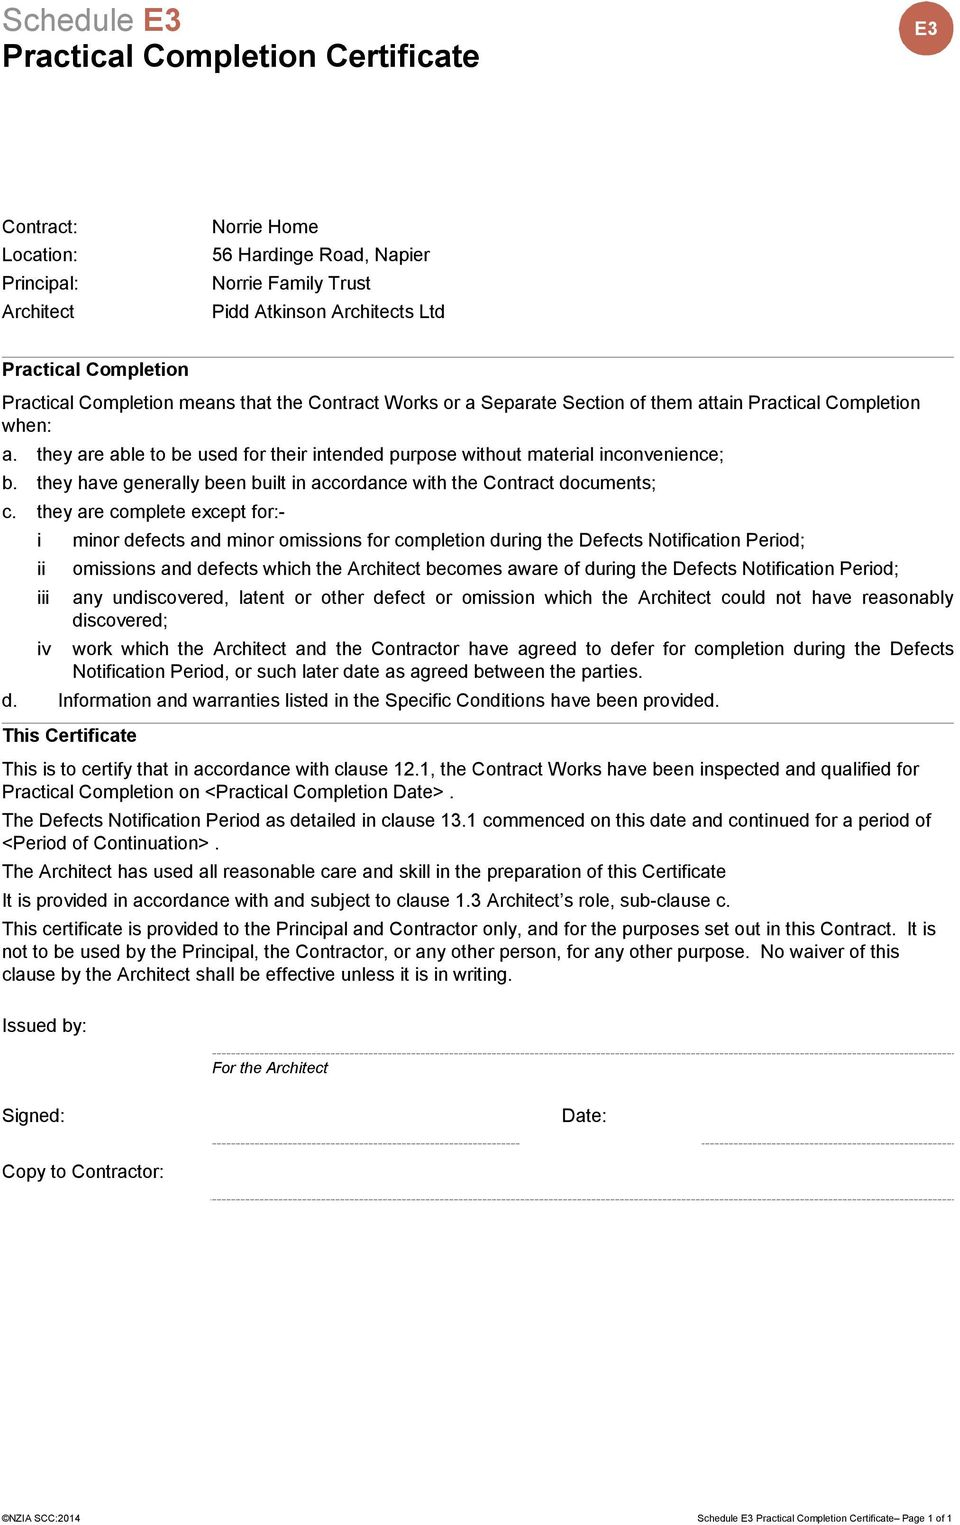 NZIA Standard Construction Contract – PDF Free Download Regarding Practical Completion Certificate Template Jct